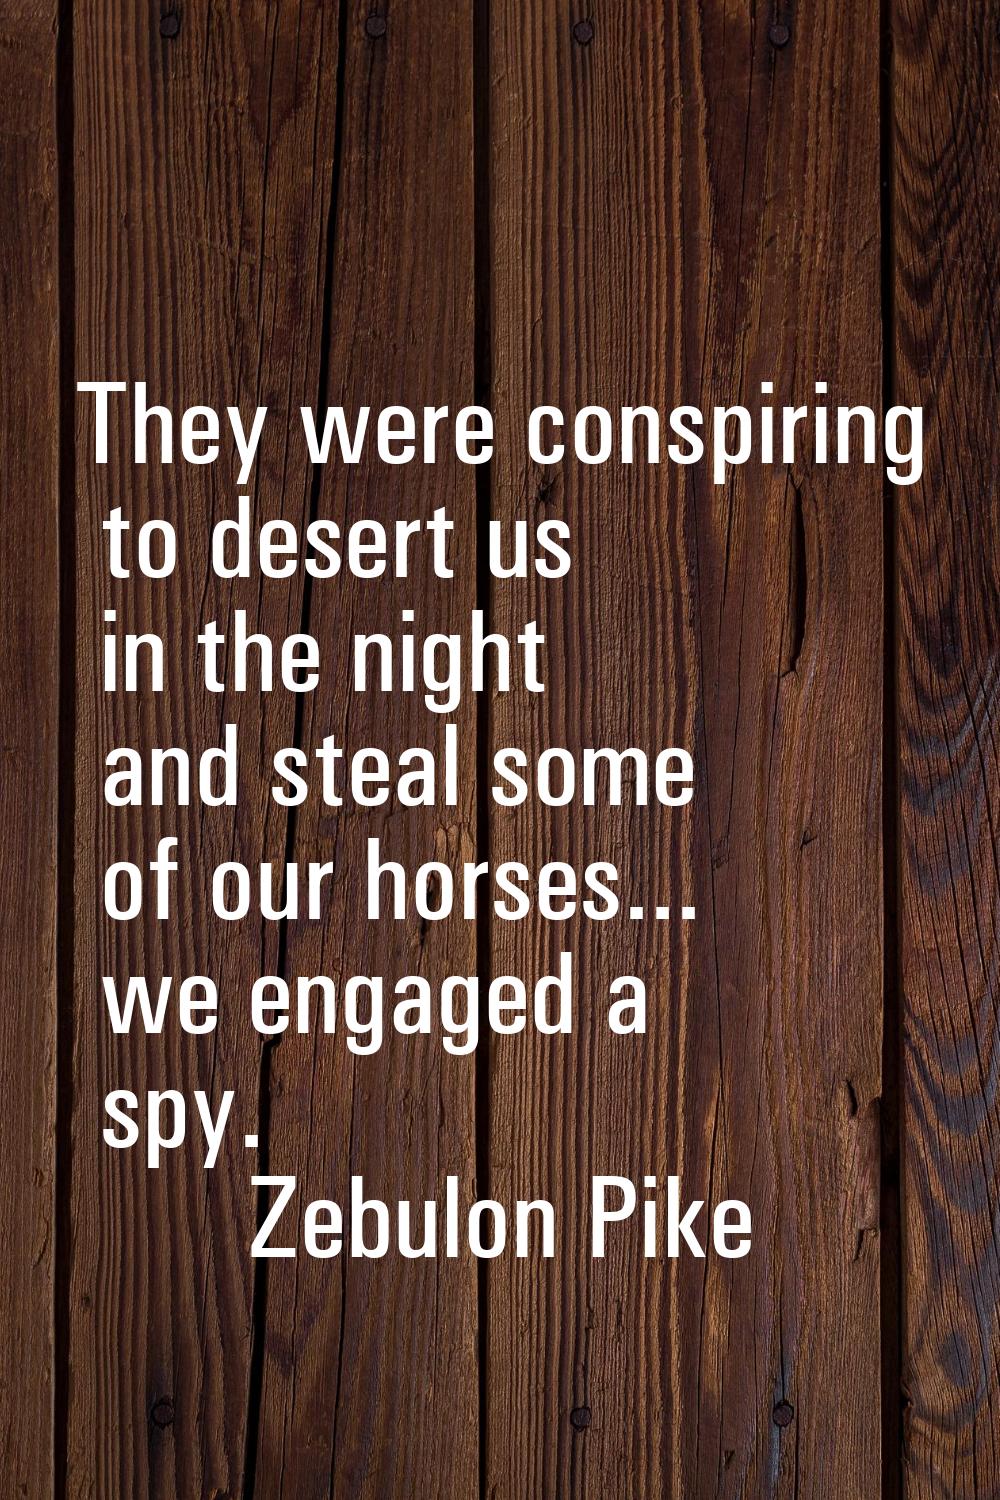 They were conspiring to desert us in the night and steal some of our horses... we engaged a spy.